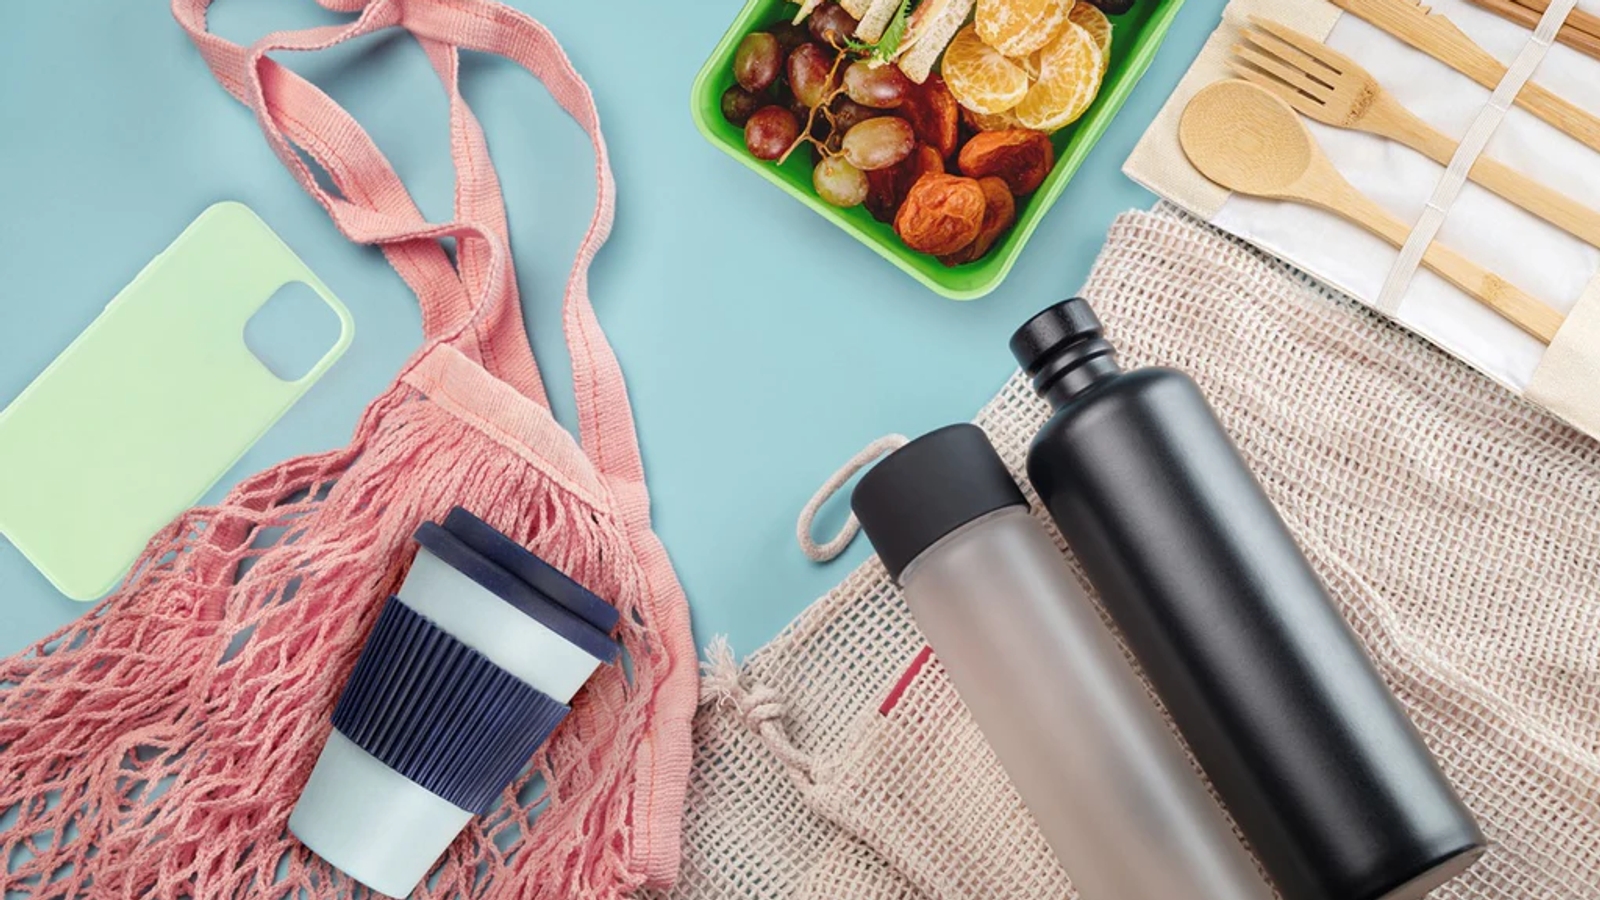 A variety of products including water bottles, coffee cups and a lunchbox